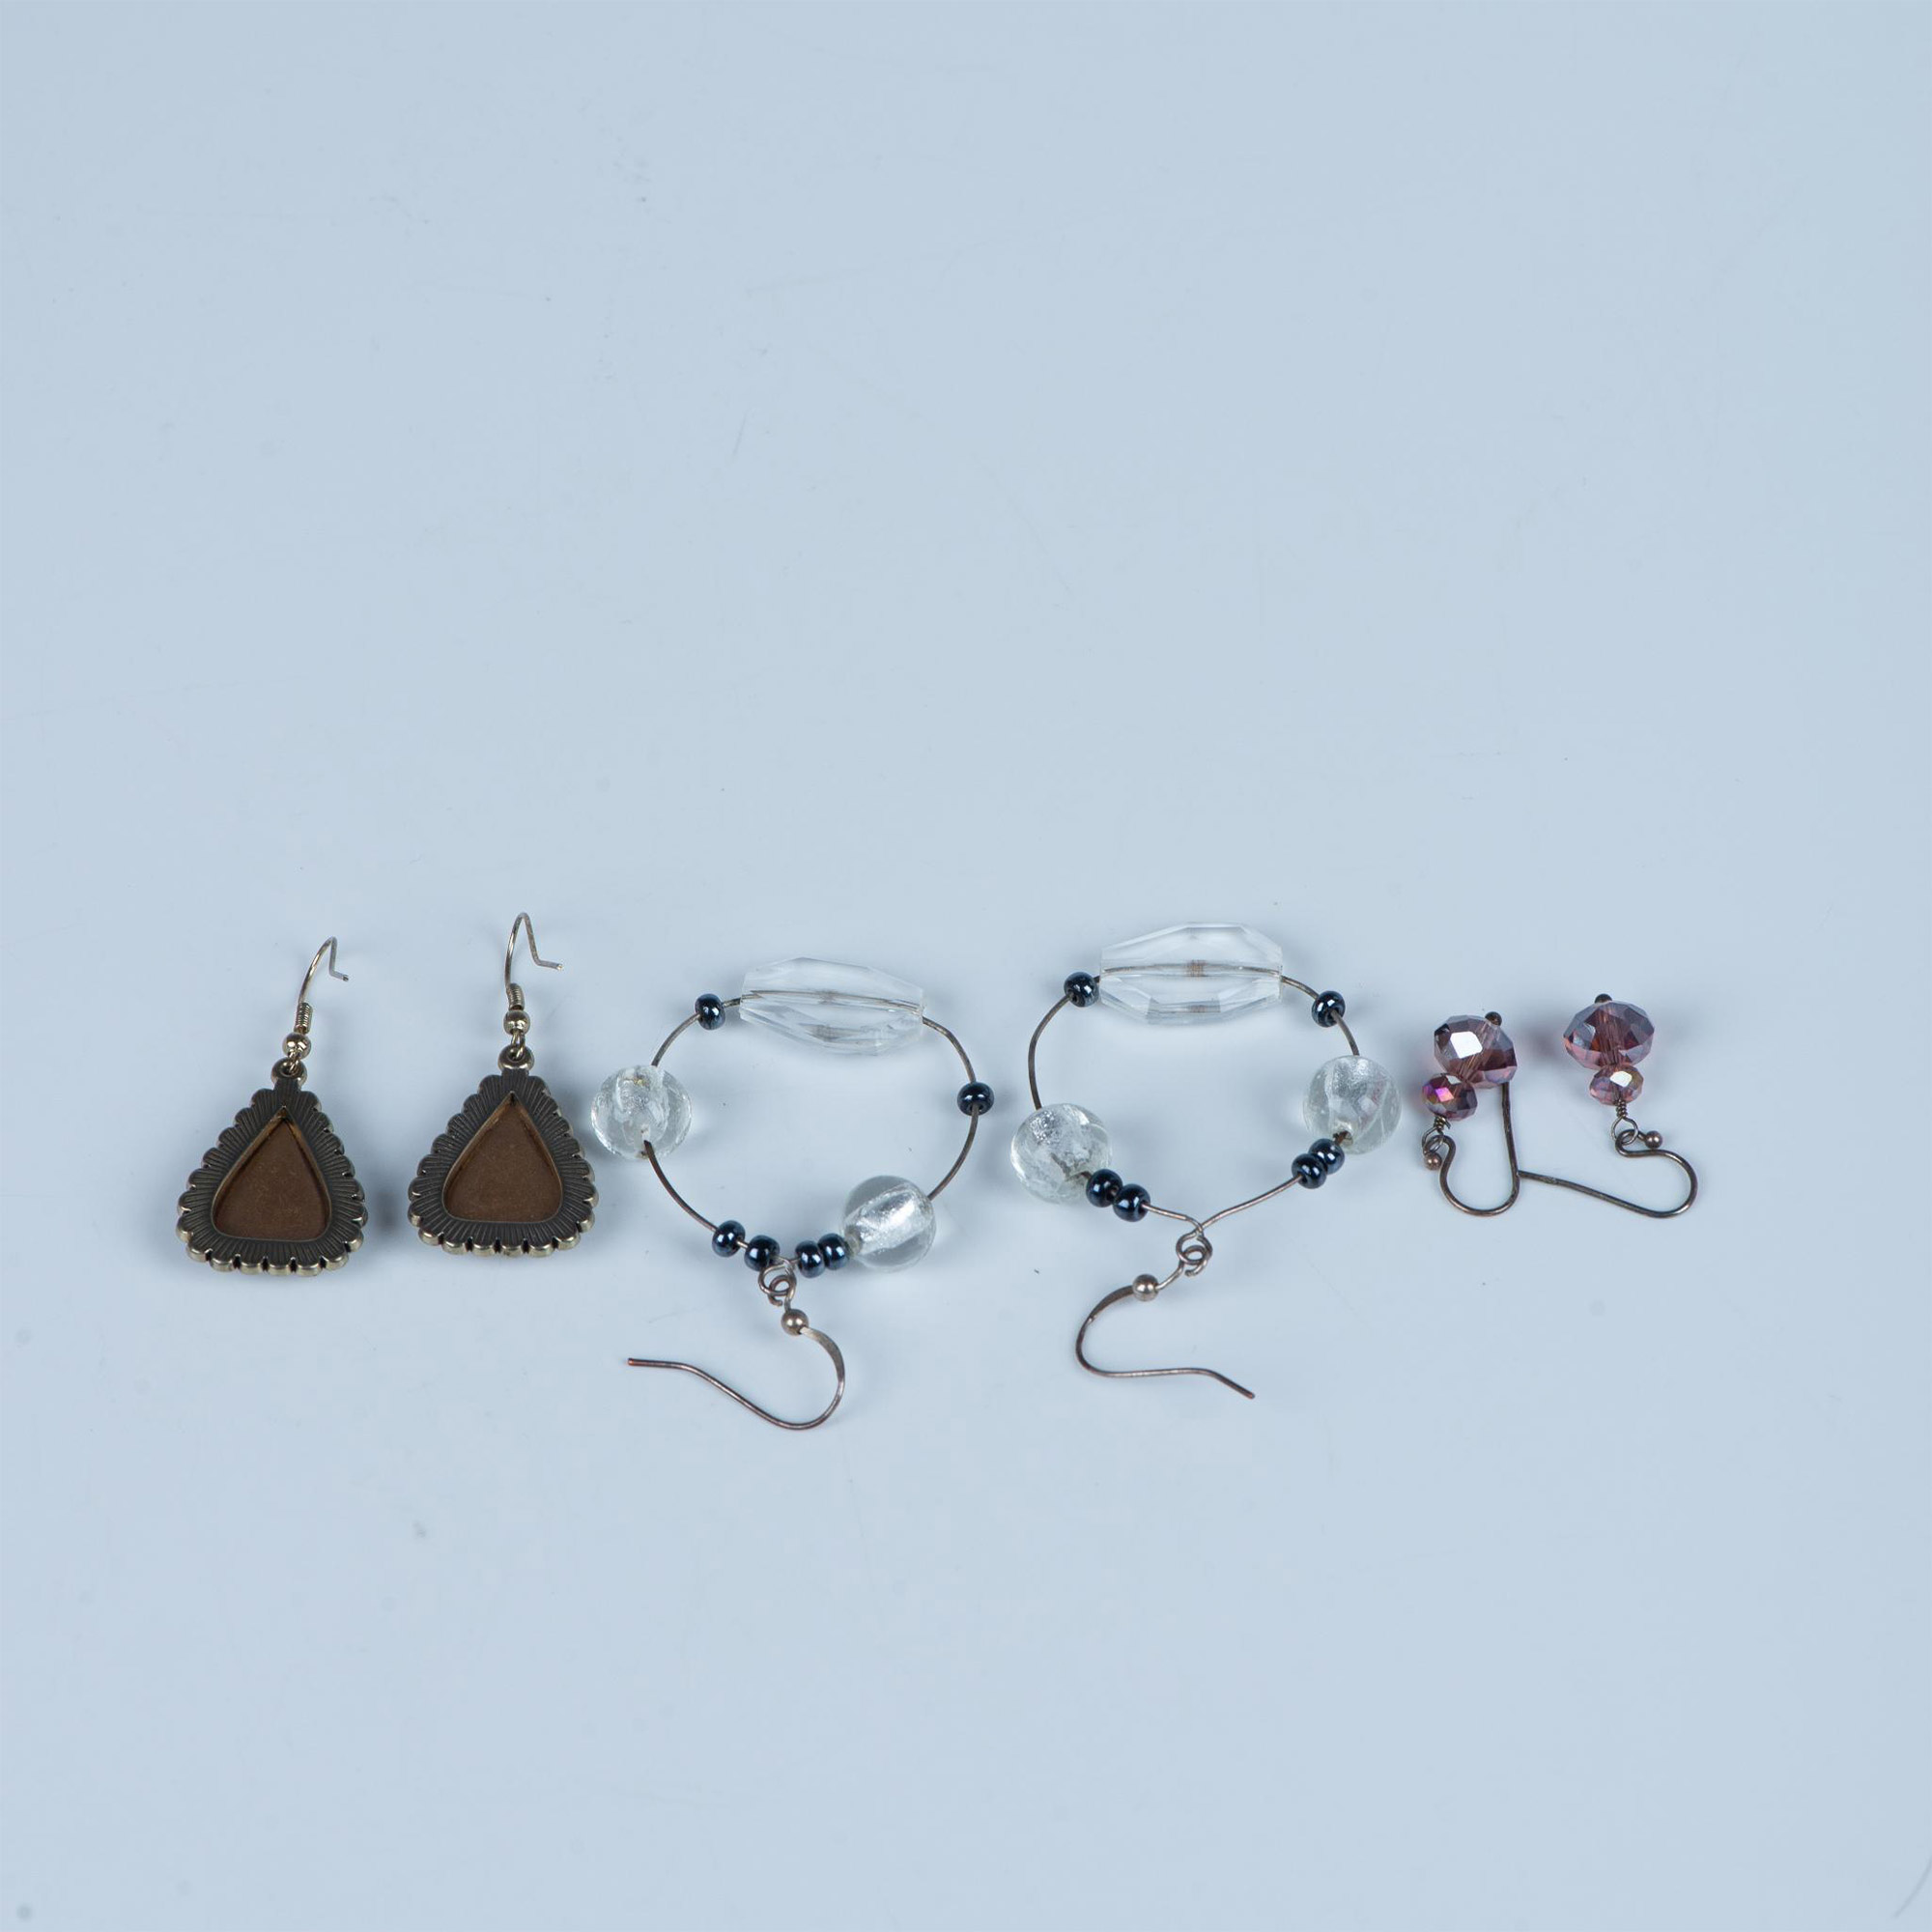 3 Pairs of Fun Unique Costume Earrings - Image 2 of 2